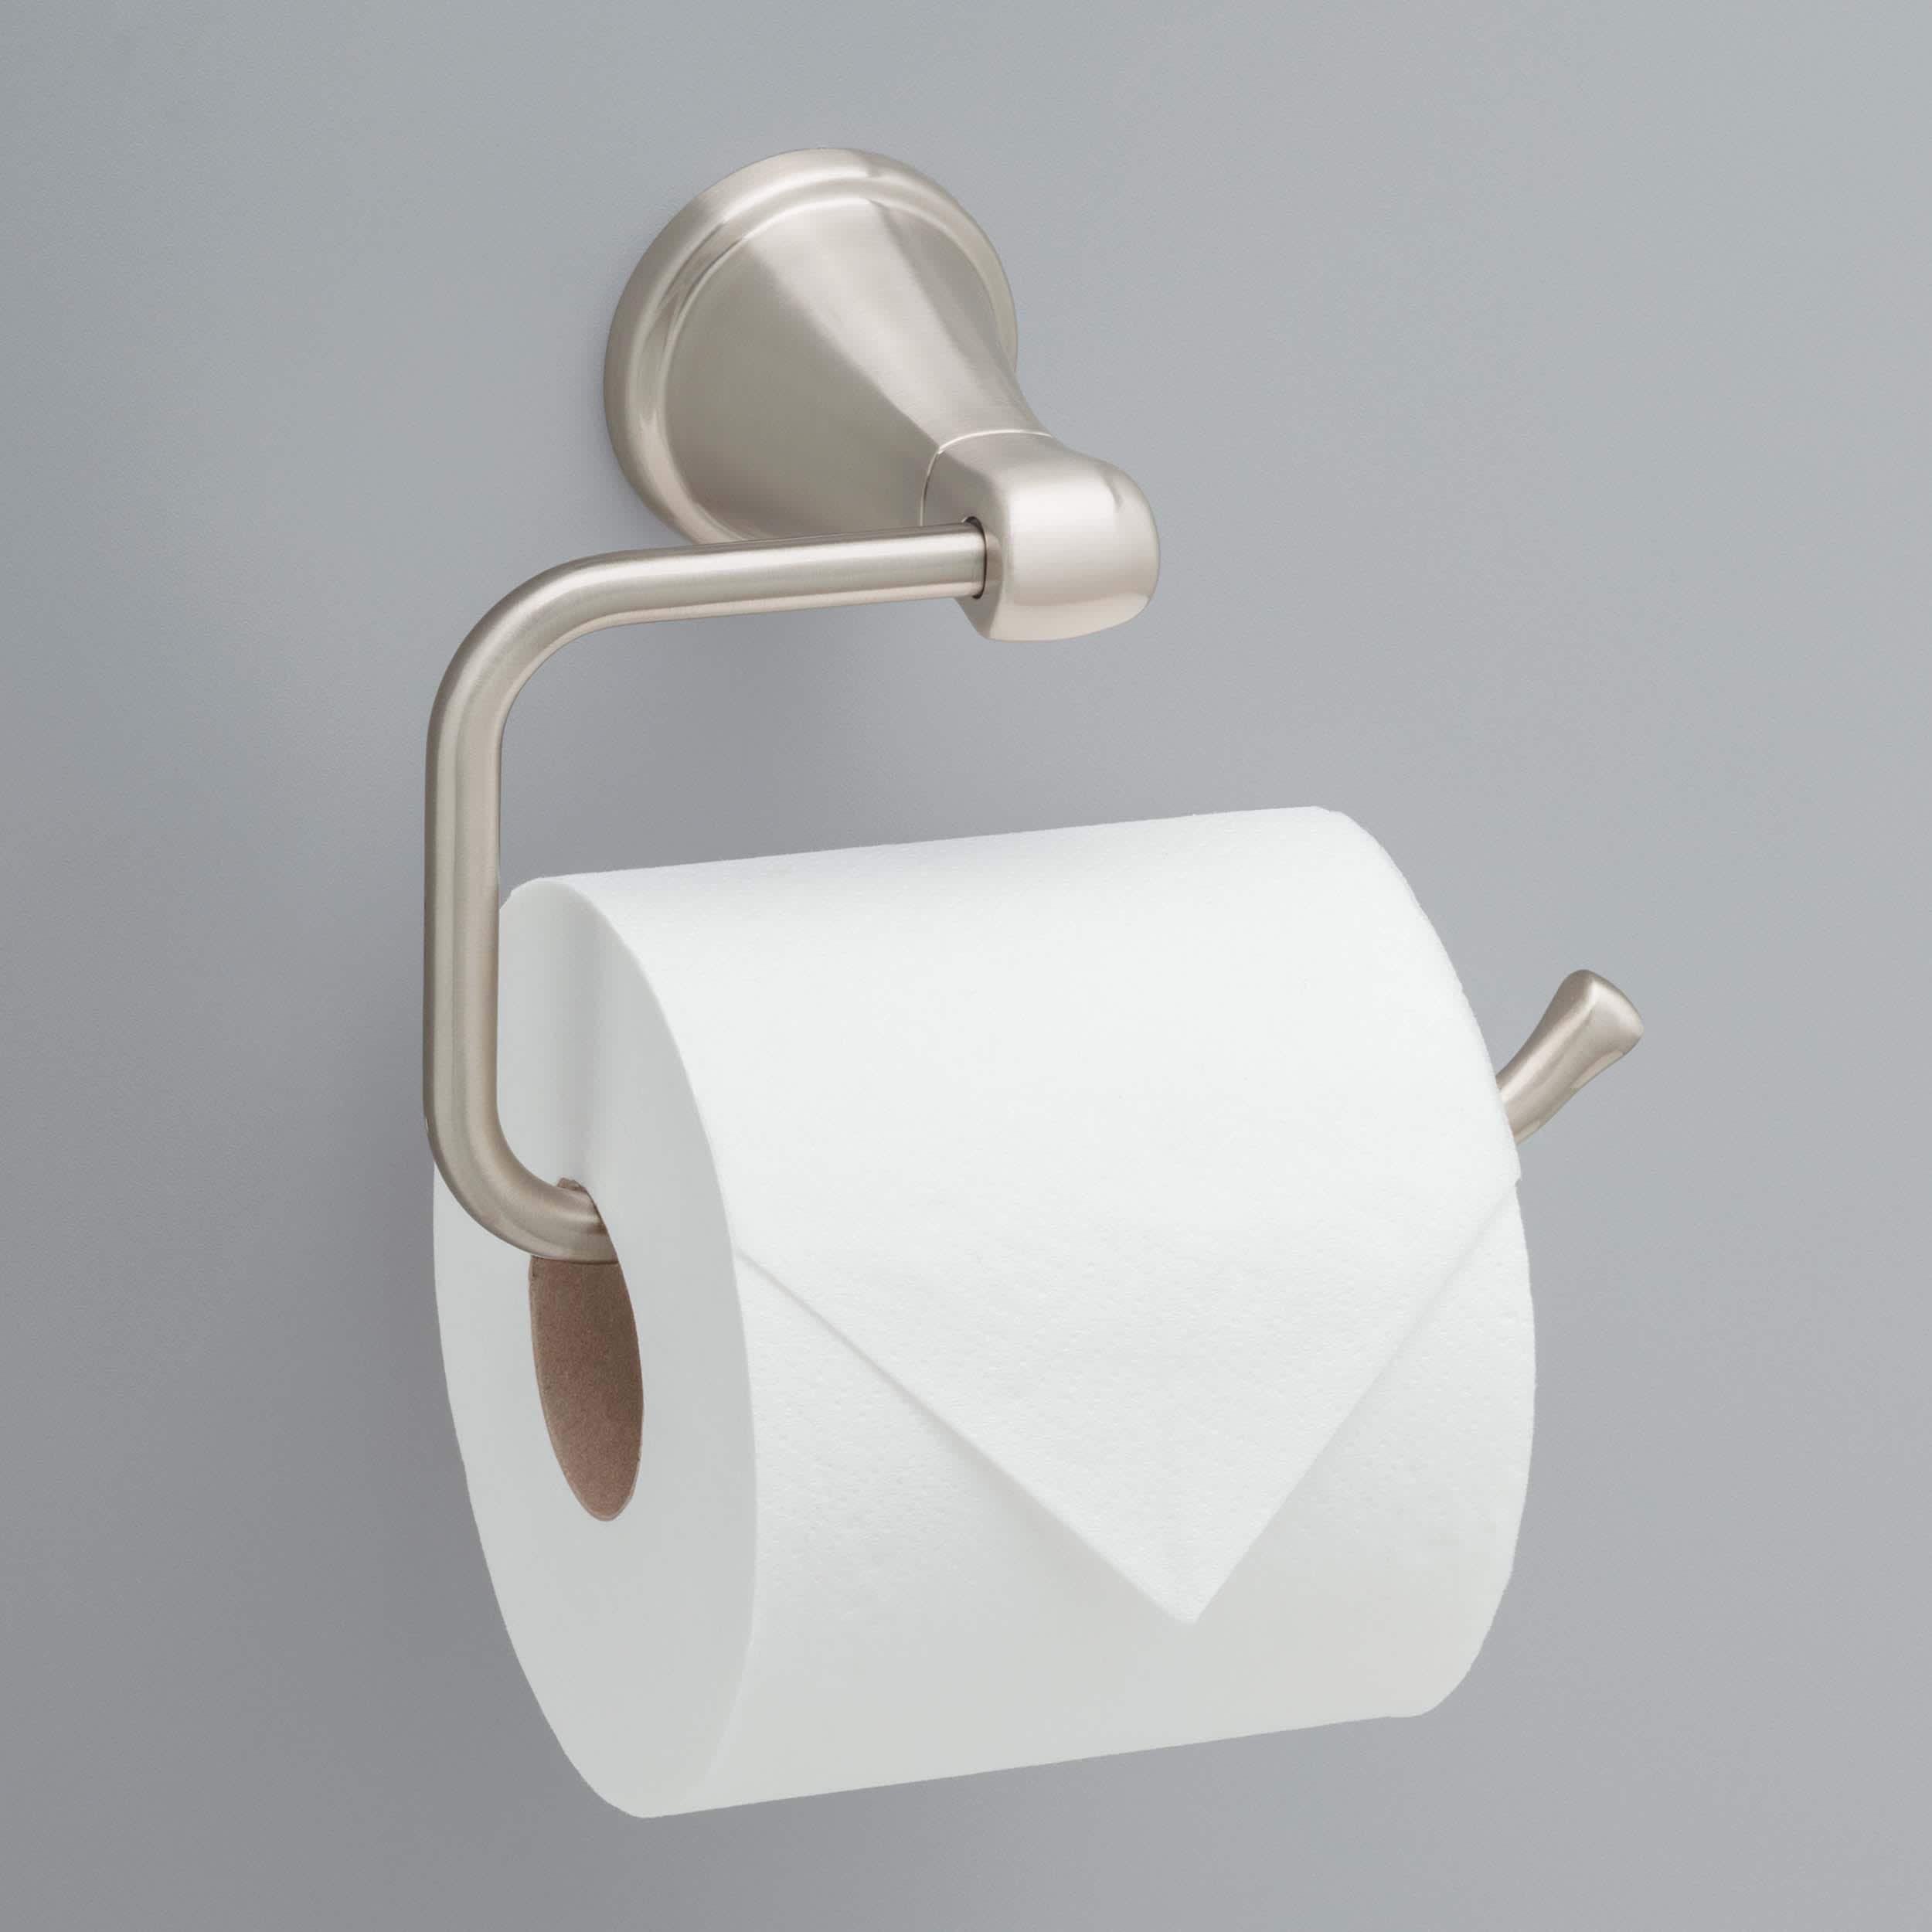 Toilet Paper Holders at